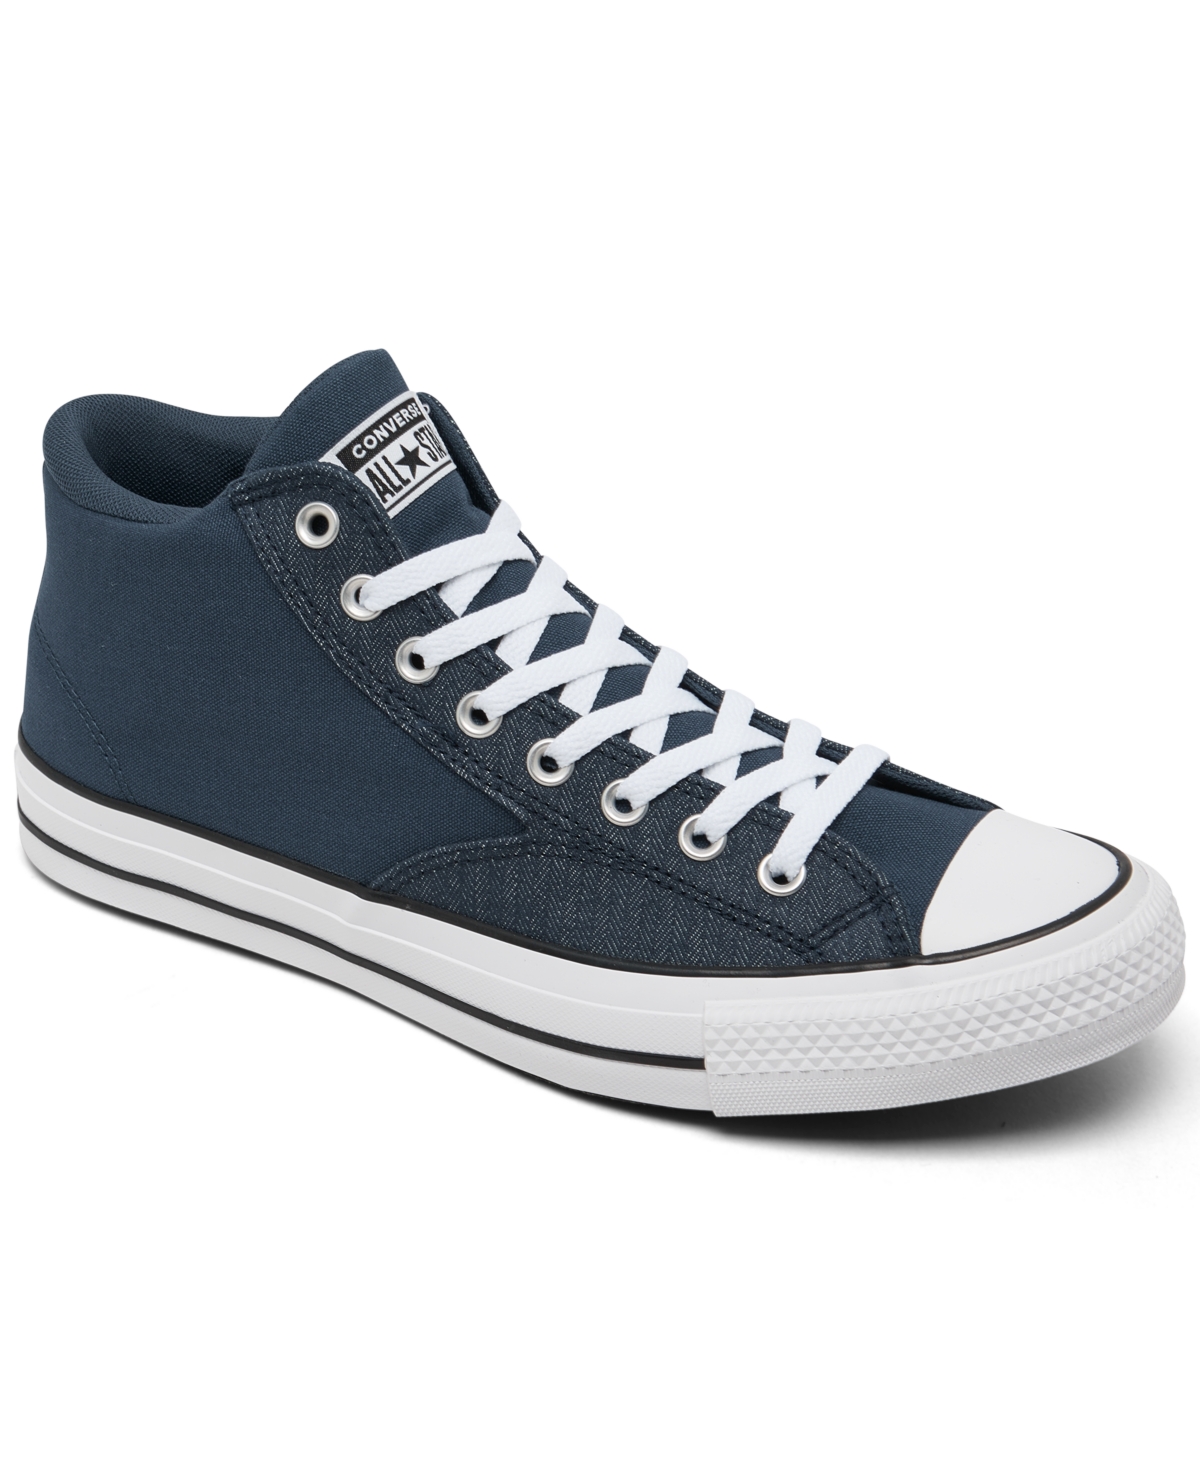 CONVERSE MEN'S CHUCK TAYLOR ALL STAR MALDEN STREET NAUTICAL CASUAL SNEAKERS FROM FINISH LINE